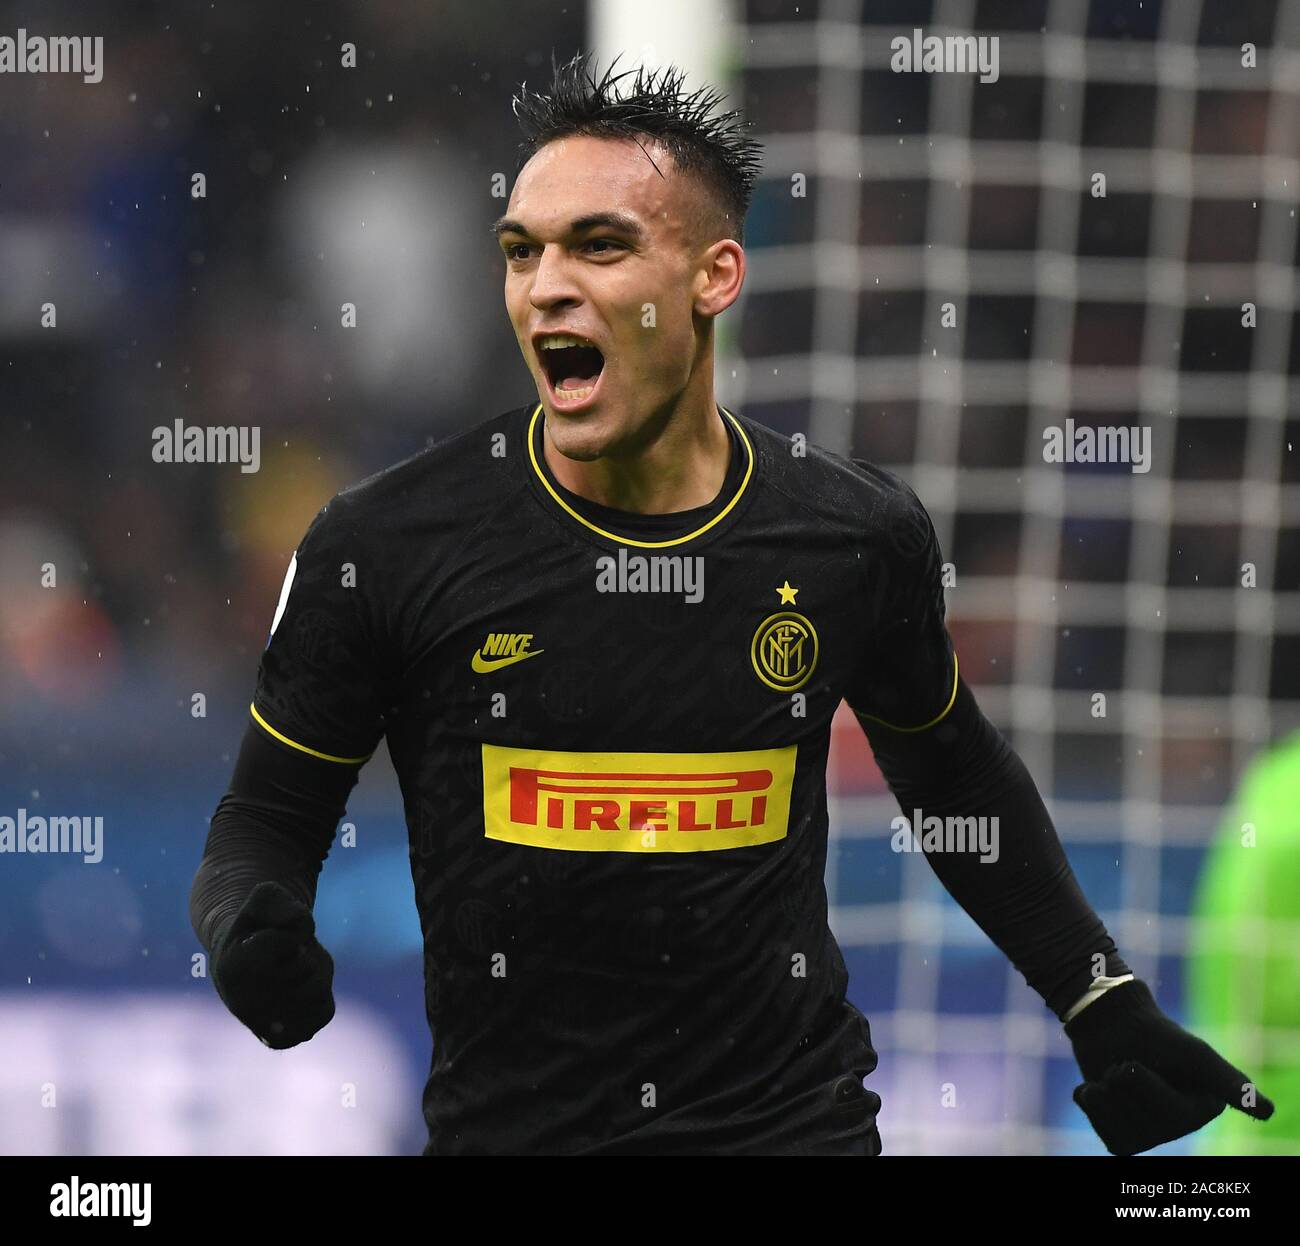 Lautaro Martinez High Resolution Stock Photography And Images Alamy